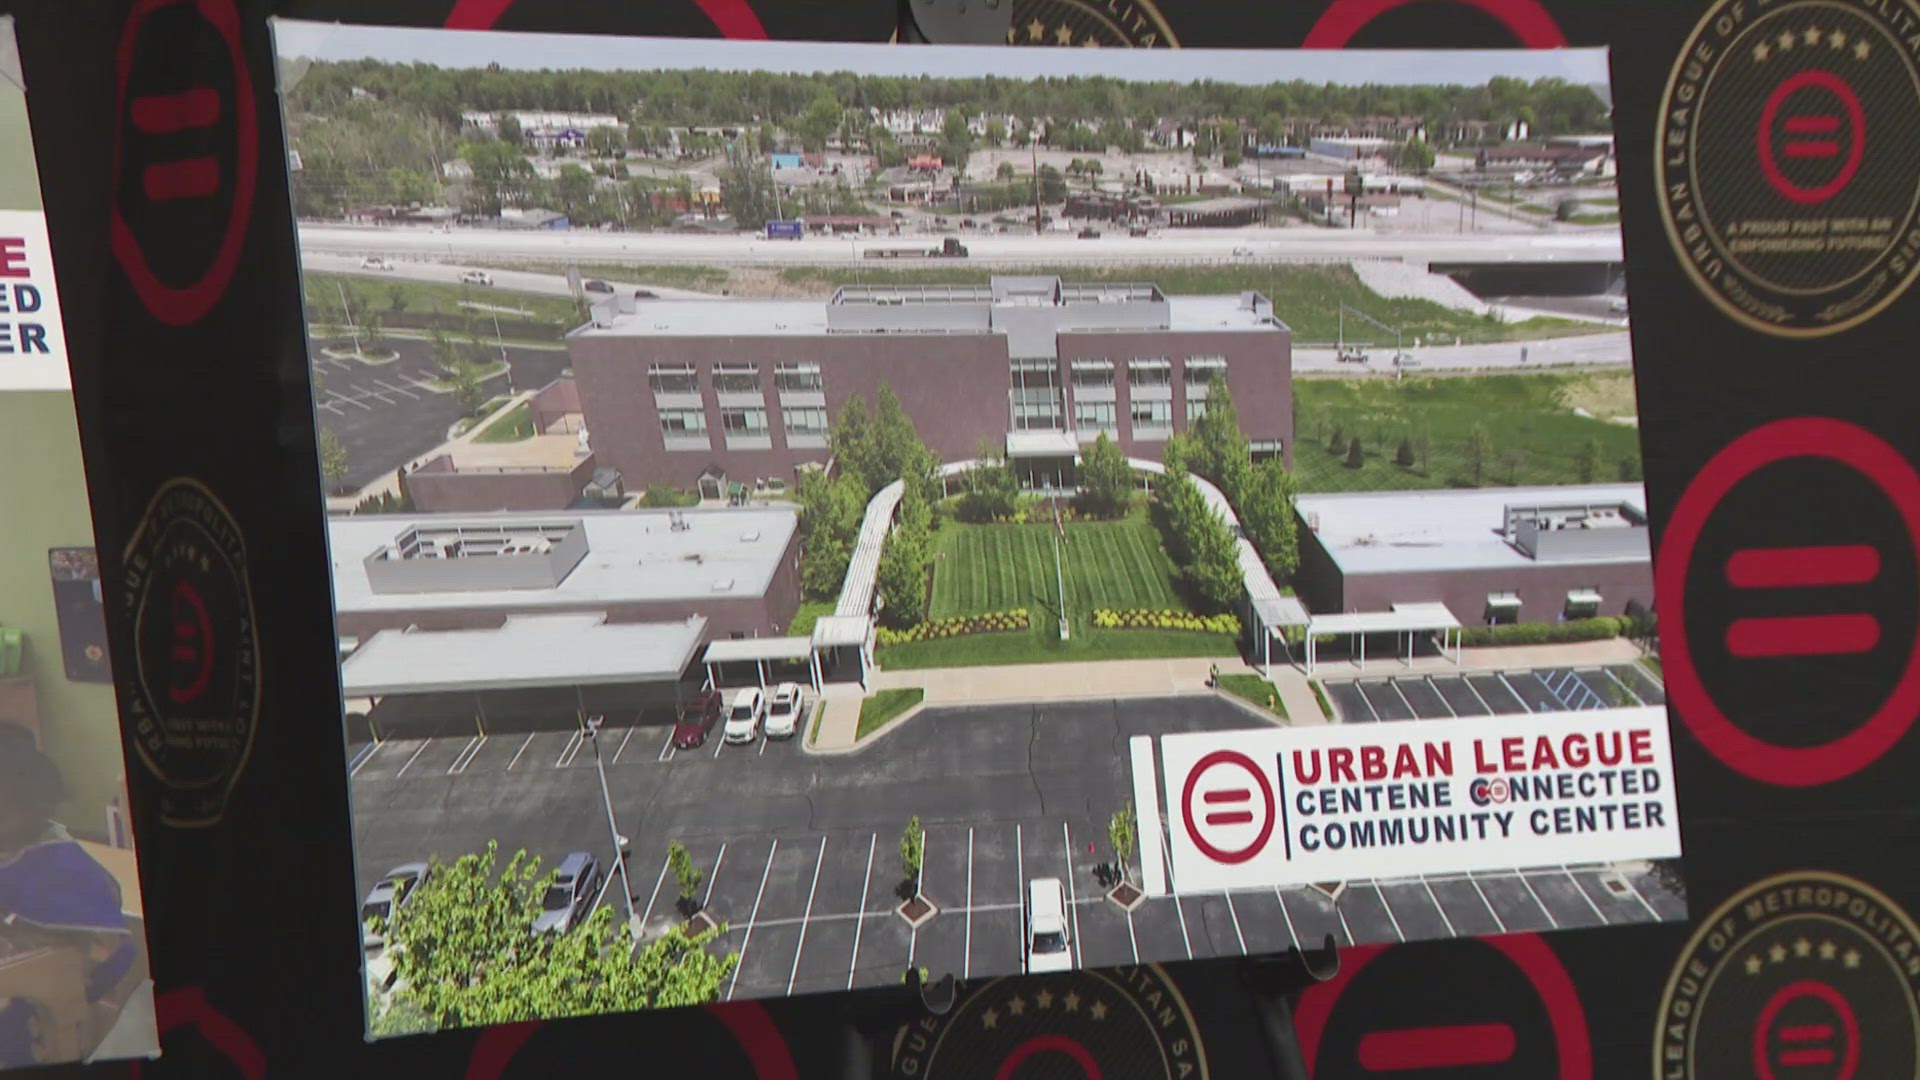 The Urban League is moving and expanding in north St. Louis County. In June, its Jennings Station Road location will move into Ferguson's Centene building.